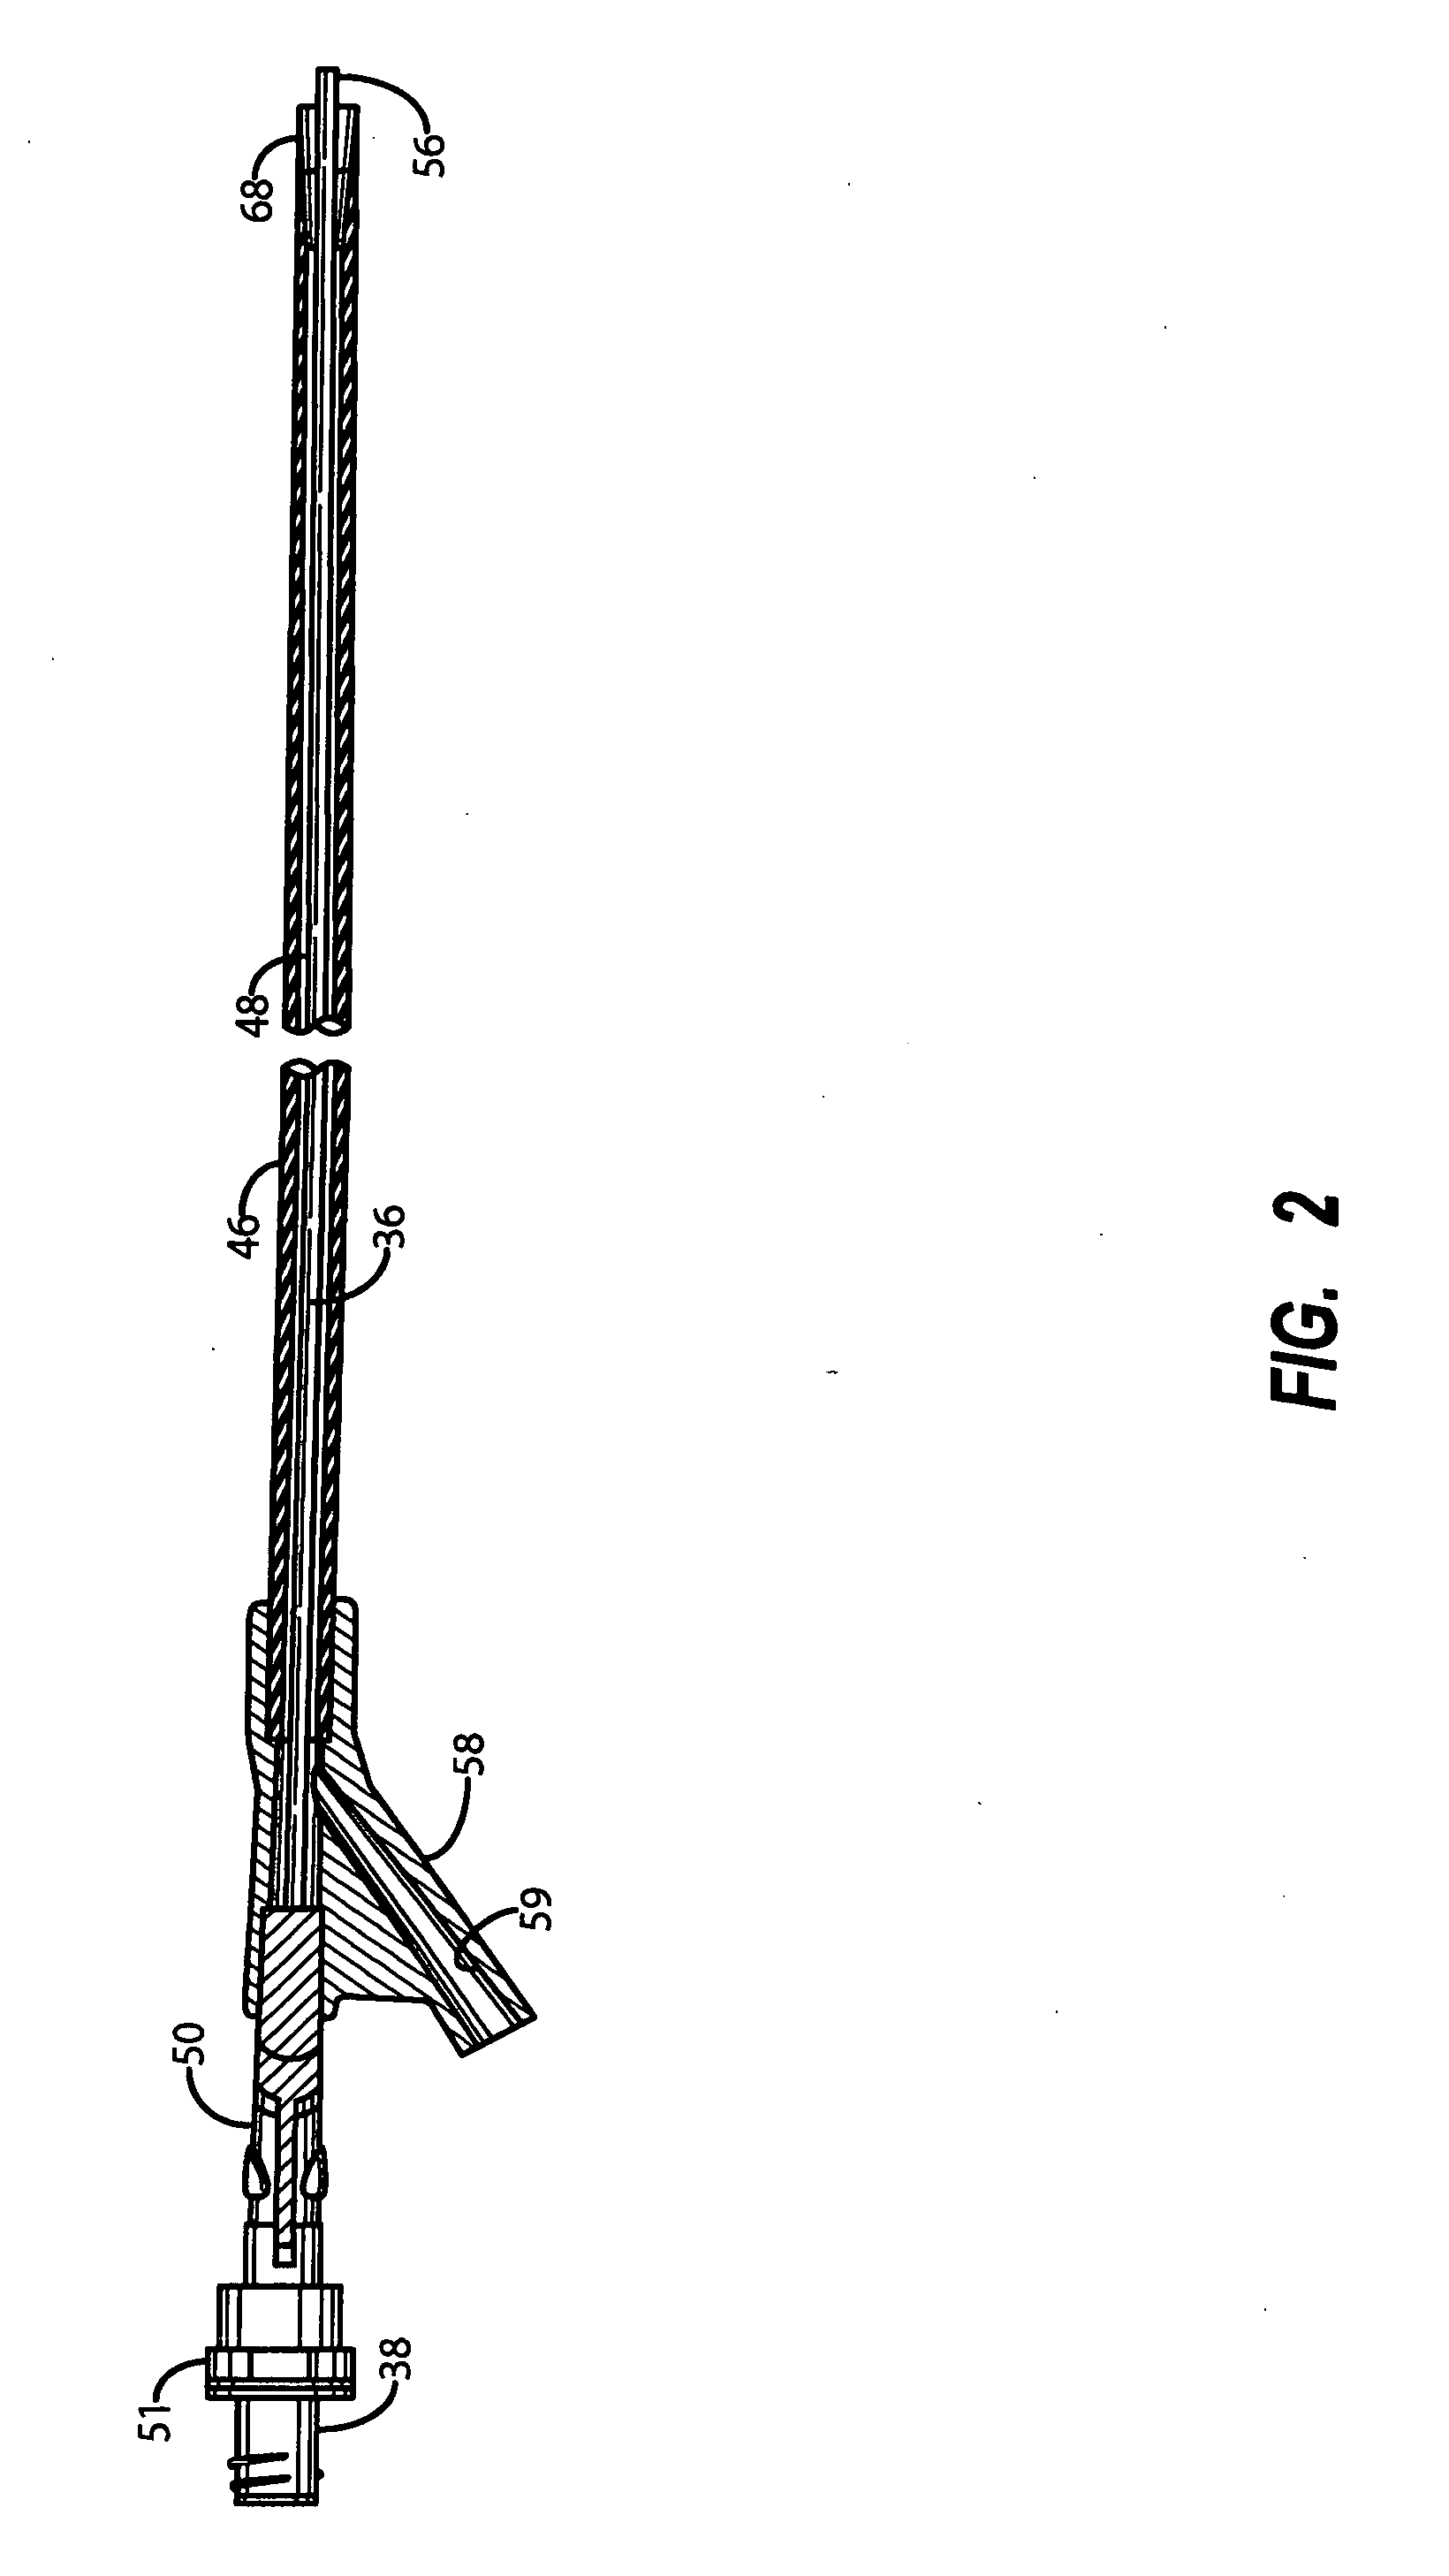 Gas assisted endoscopic applicator system